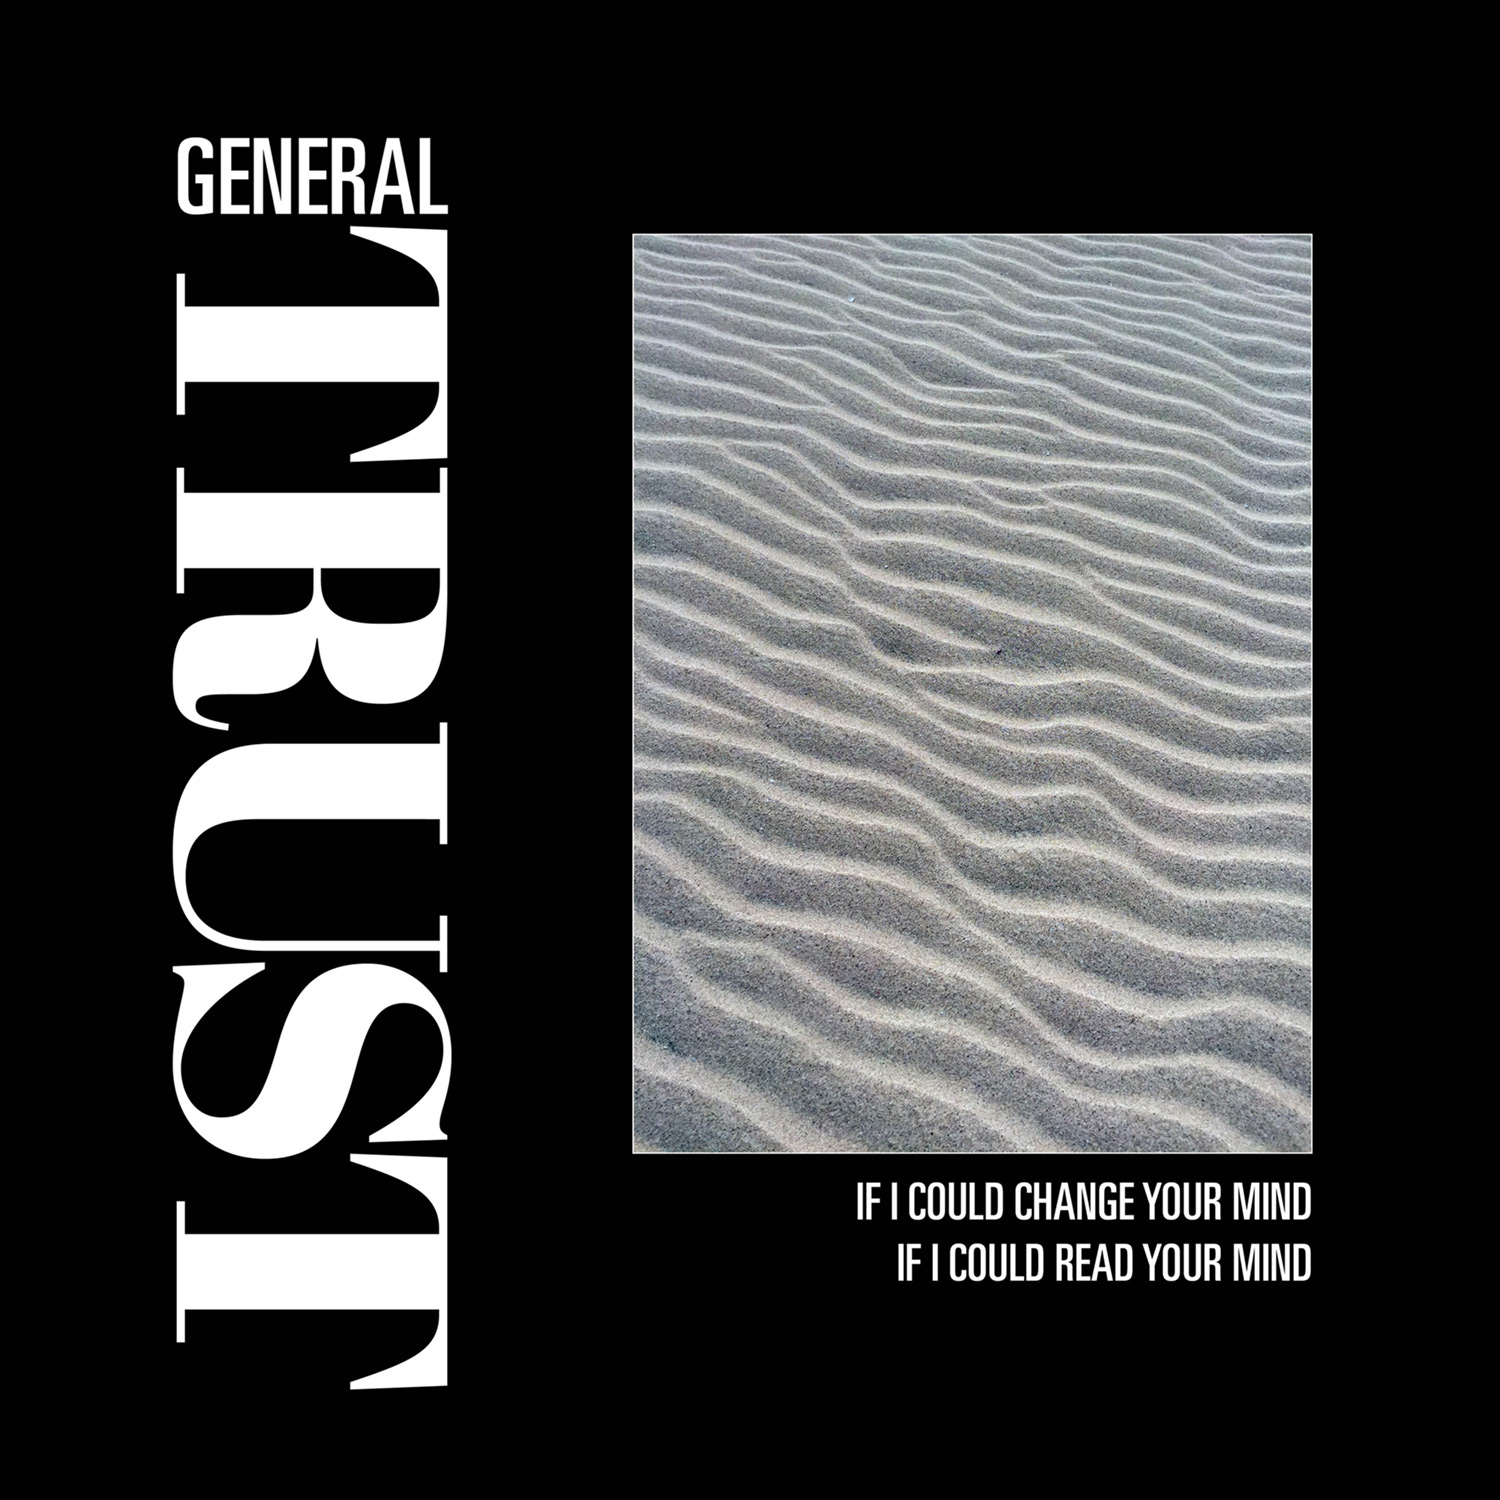 General Trust - “If I Could Change Your Mind” / “If I Could Read Your Mind”